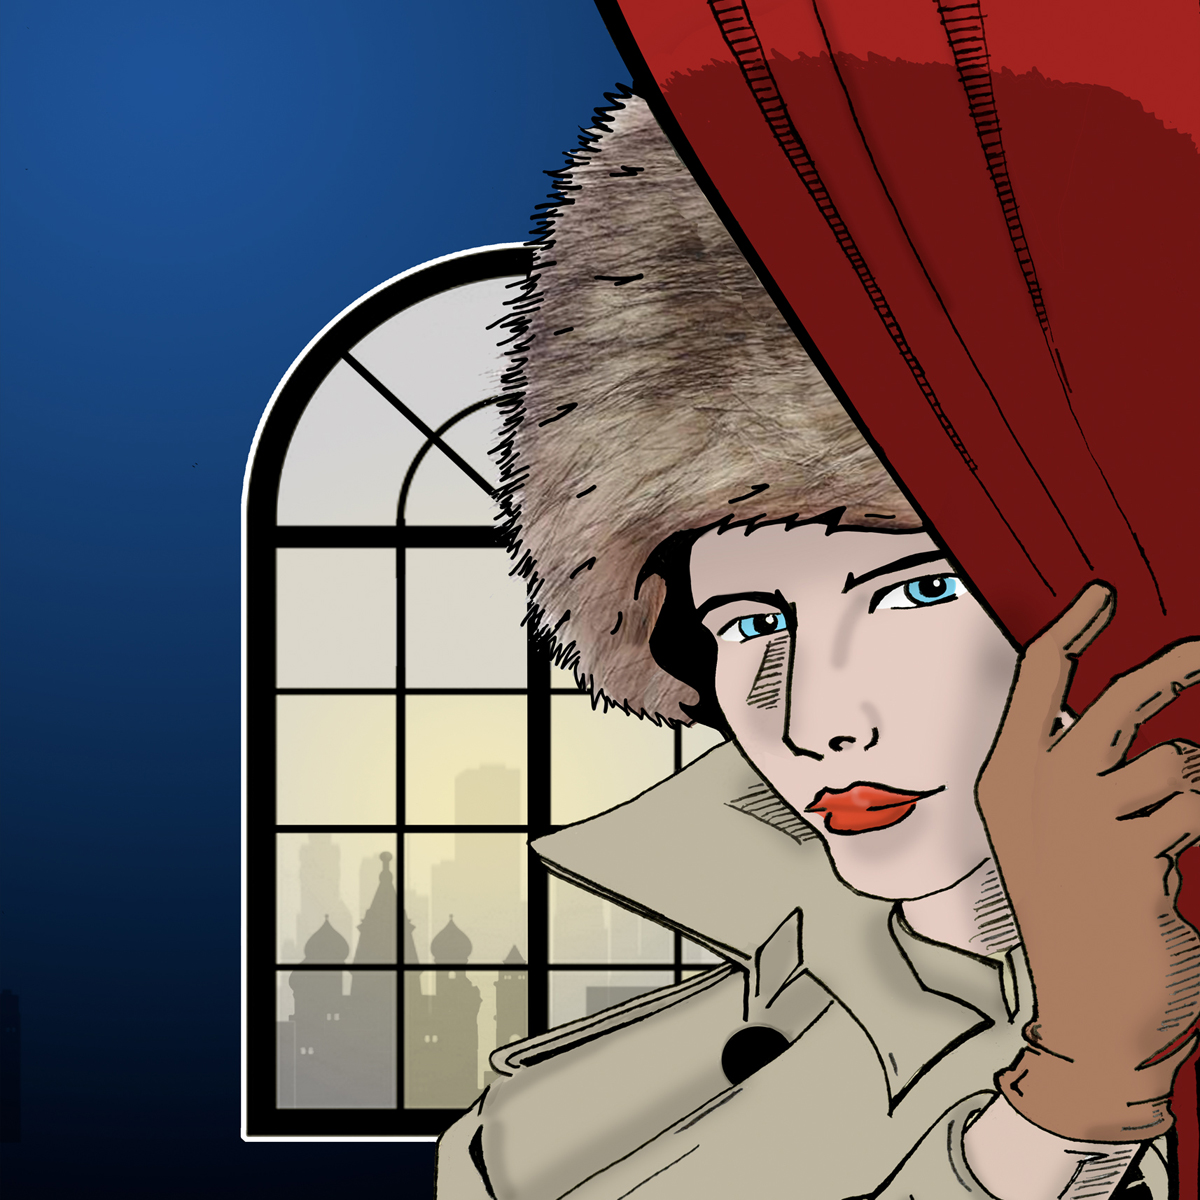 Illustration of woman wearing a Soviet style ushanka fur hat peeking out from behind a curtain